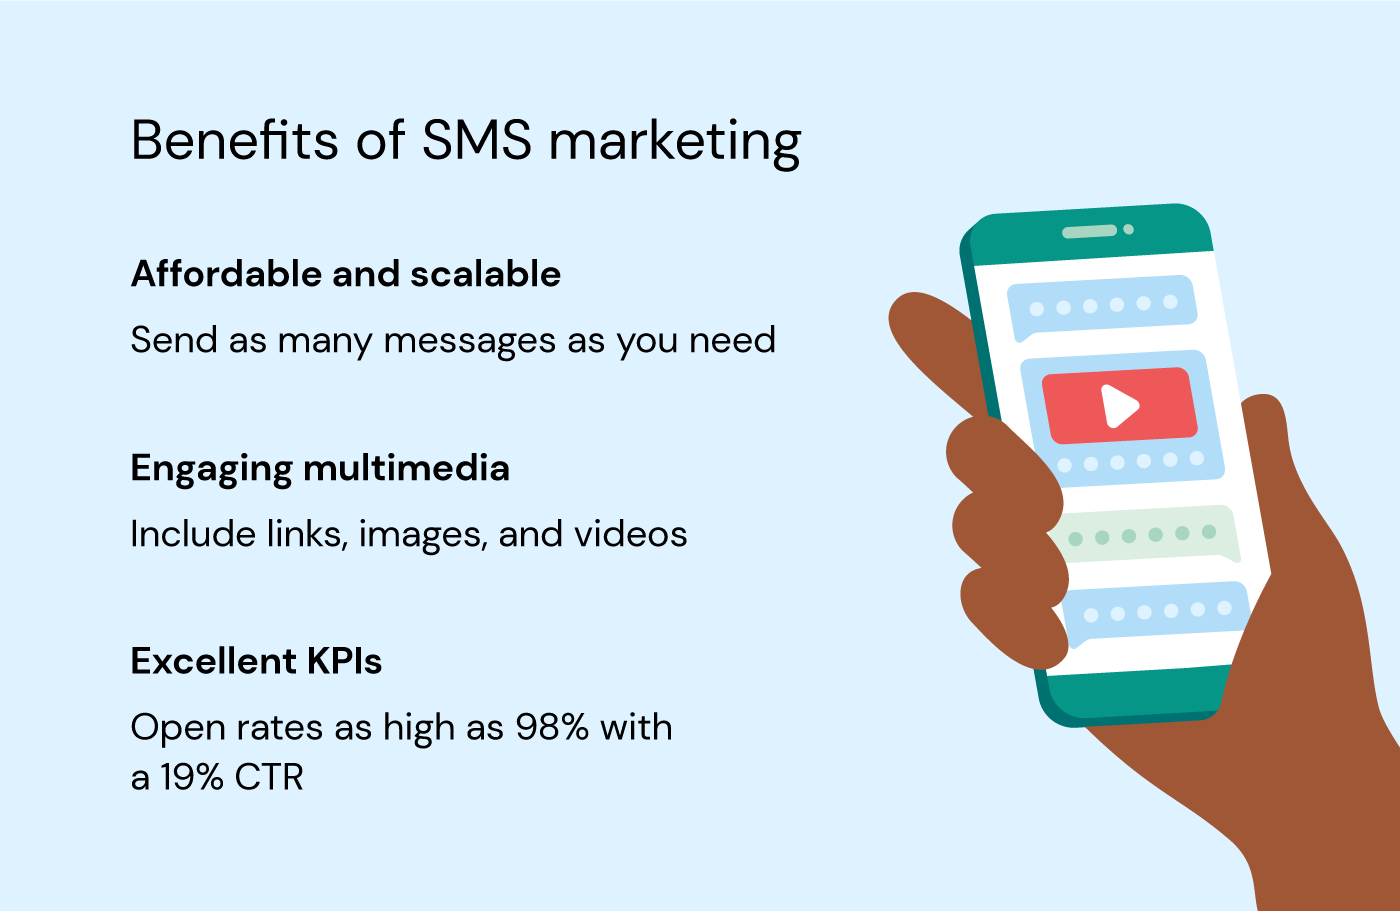 How to compare SMS marketing costs and opportunities